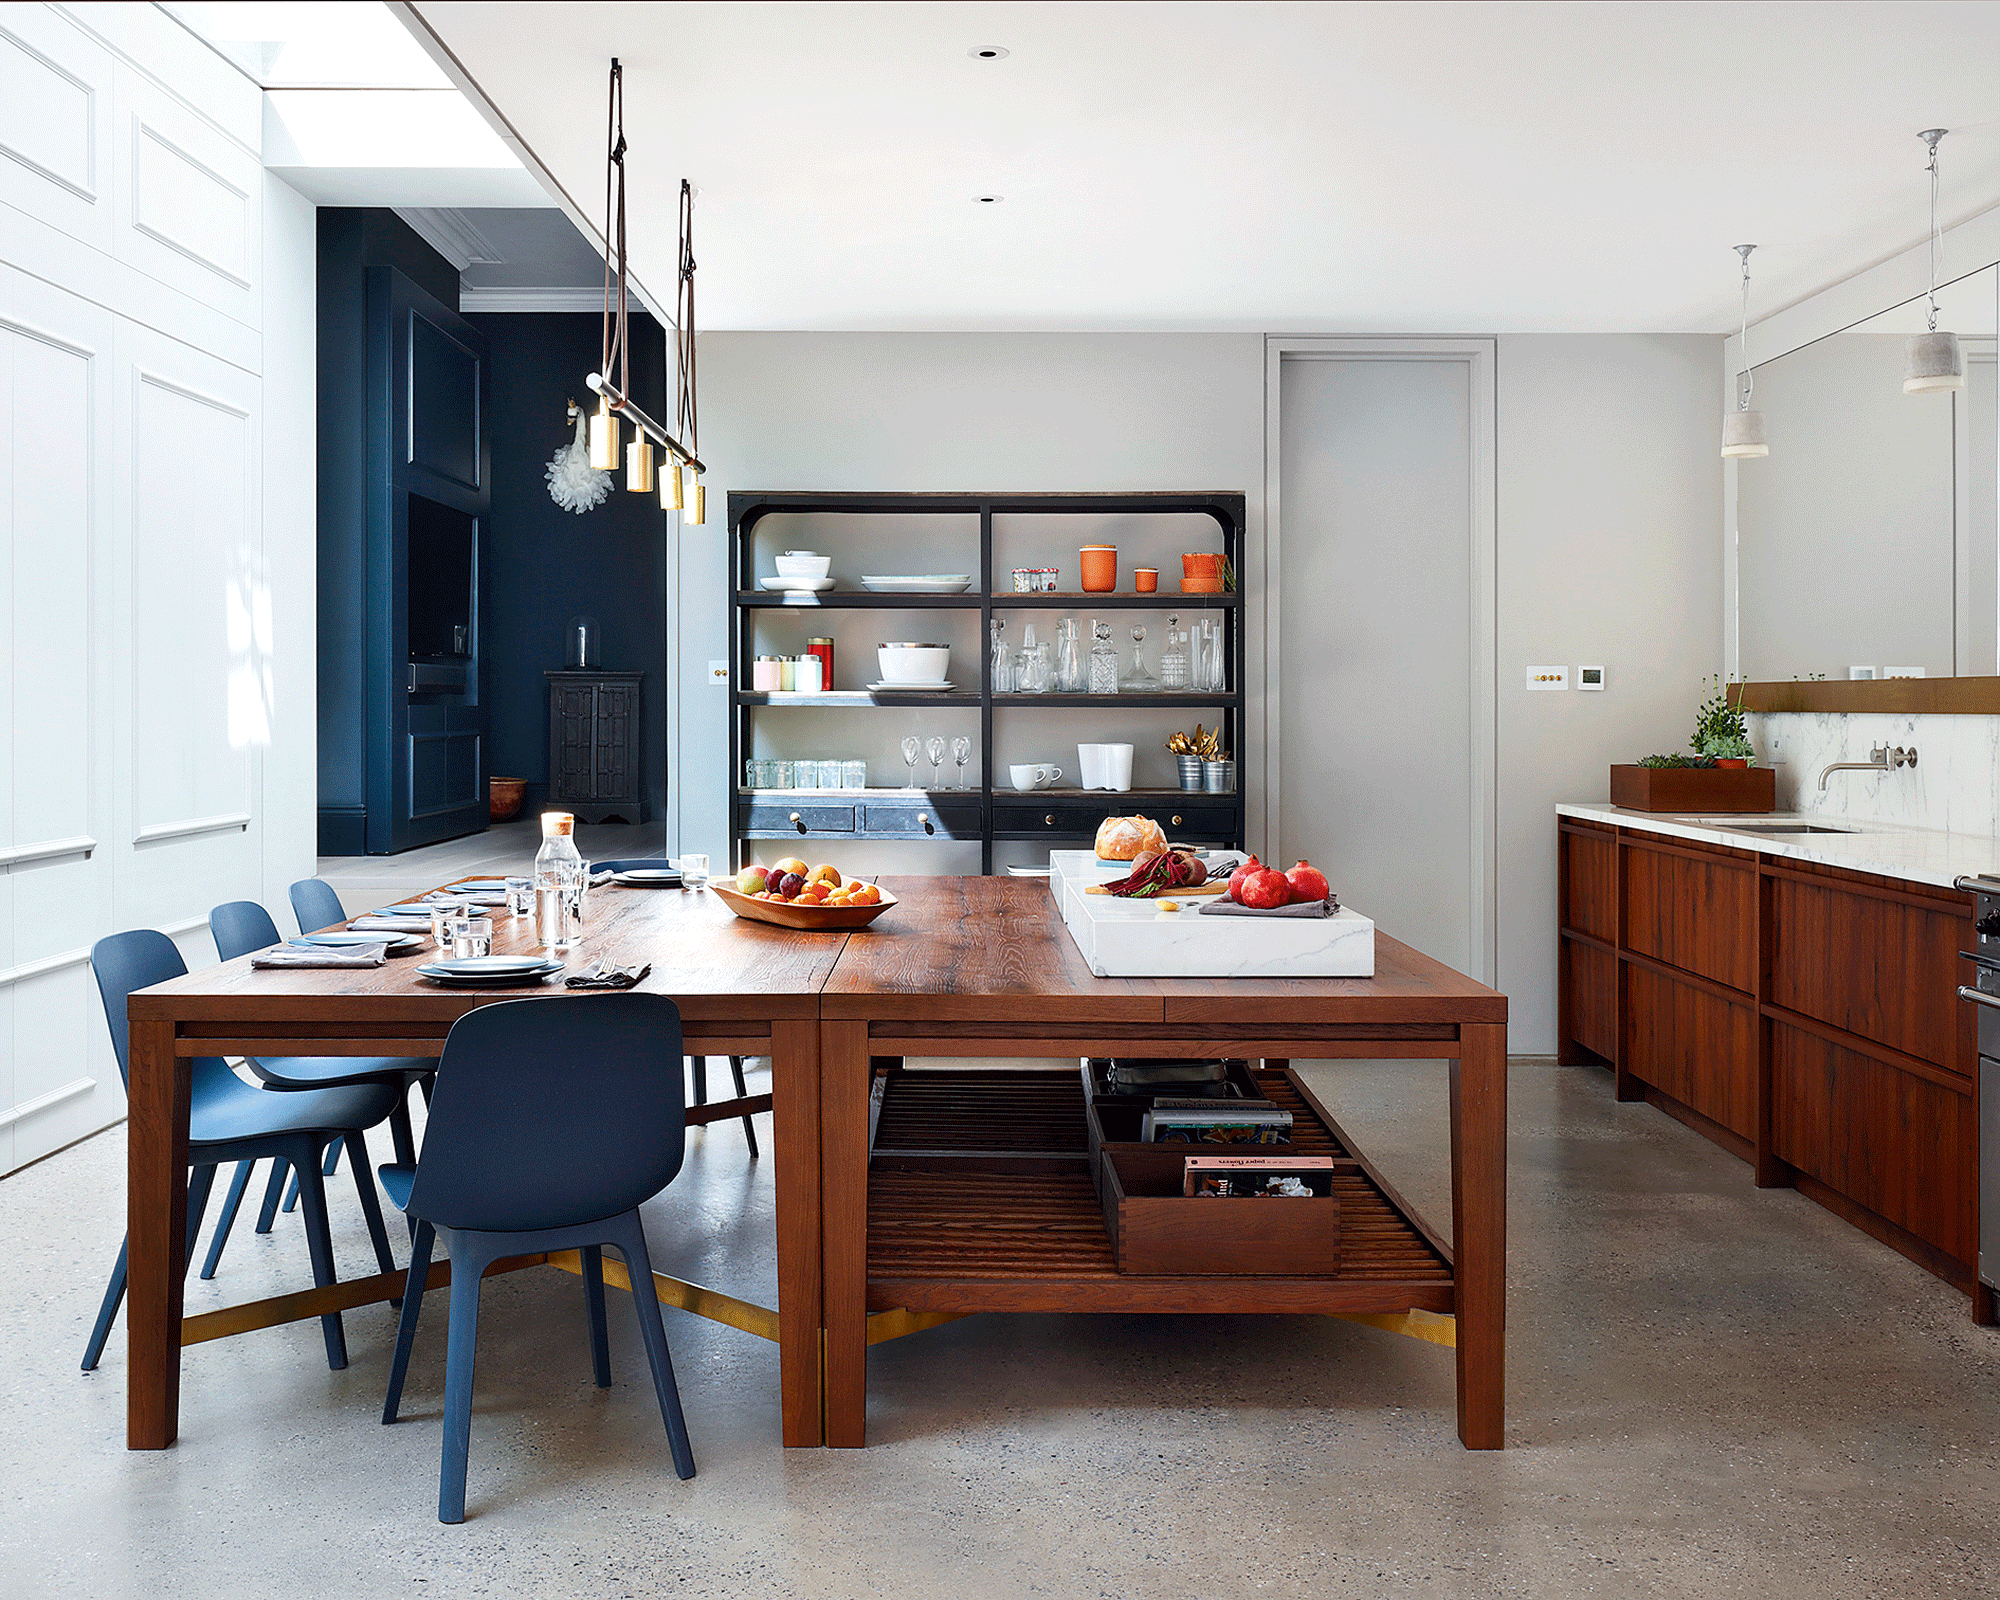 A freestanding kitchen with a large wooden island with blue chairs